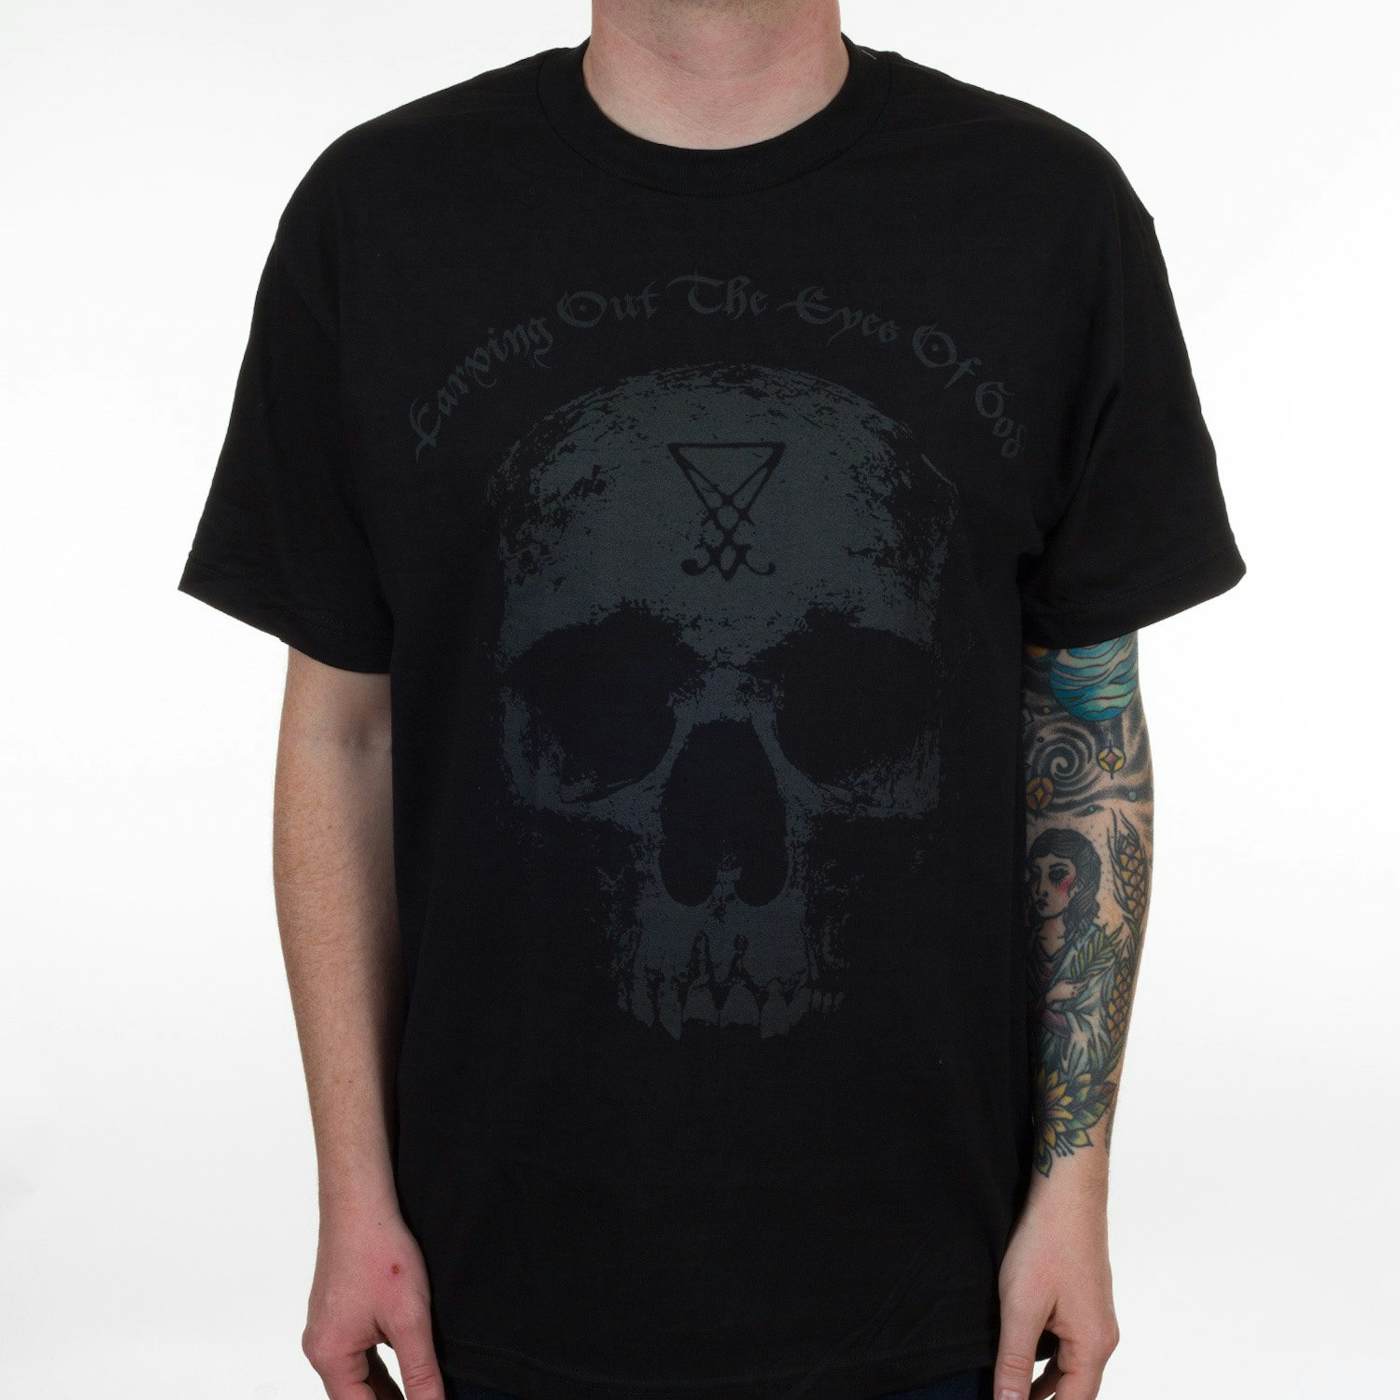 Goatwhore "Carving Out The Eyes of God" T-Shirt